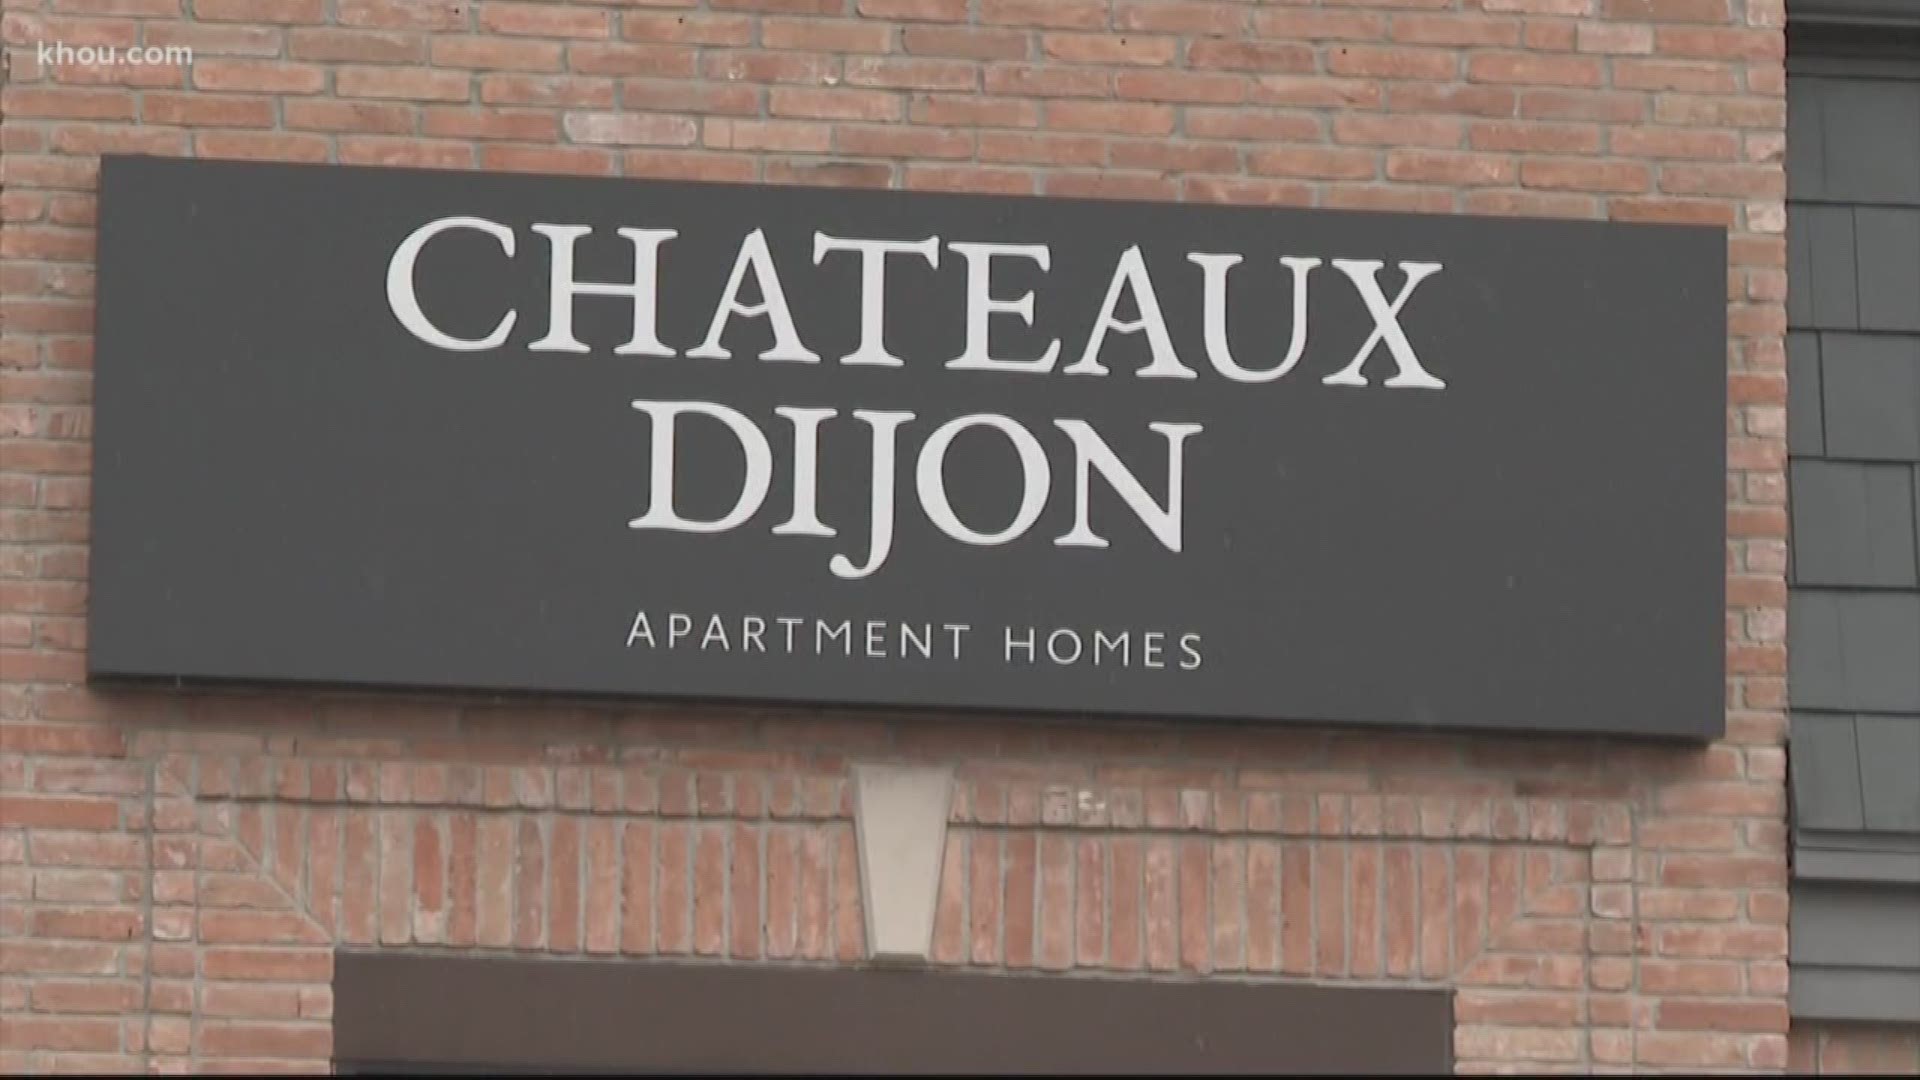 The worker is expected to survive after she was shot at the Chateaux Dijon apartments on Wednesday.